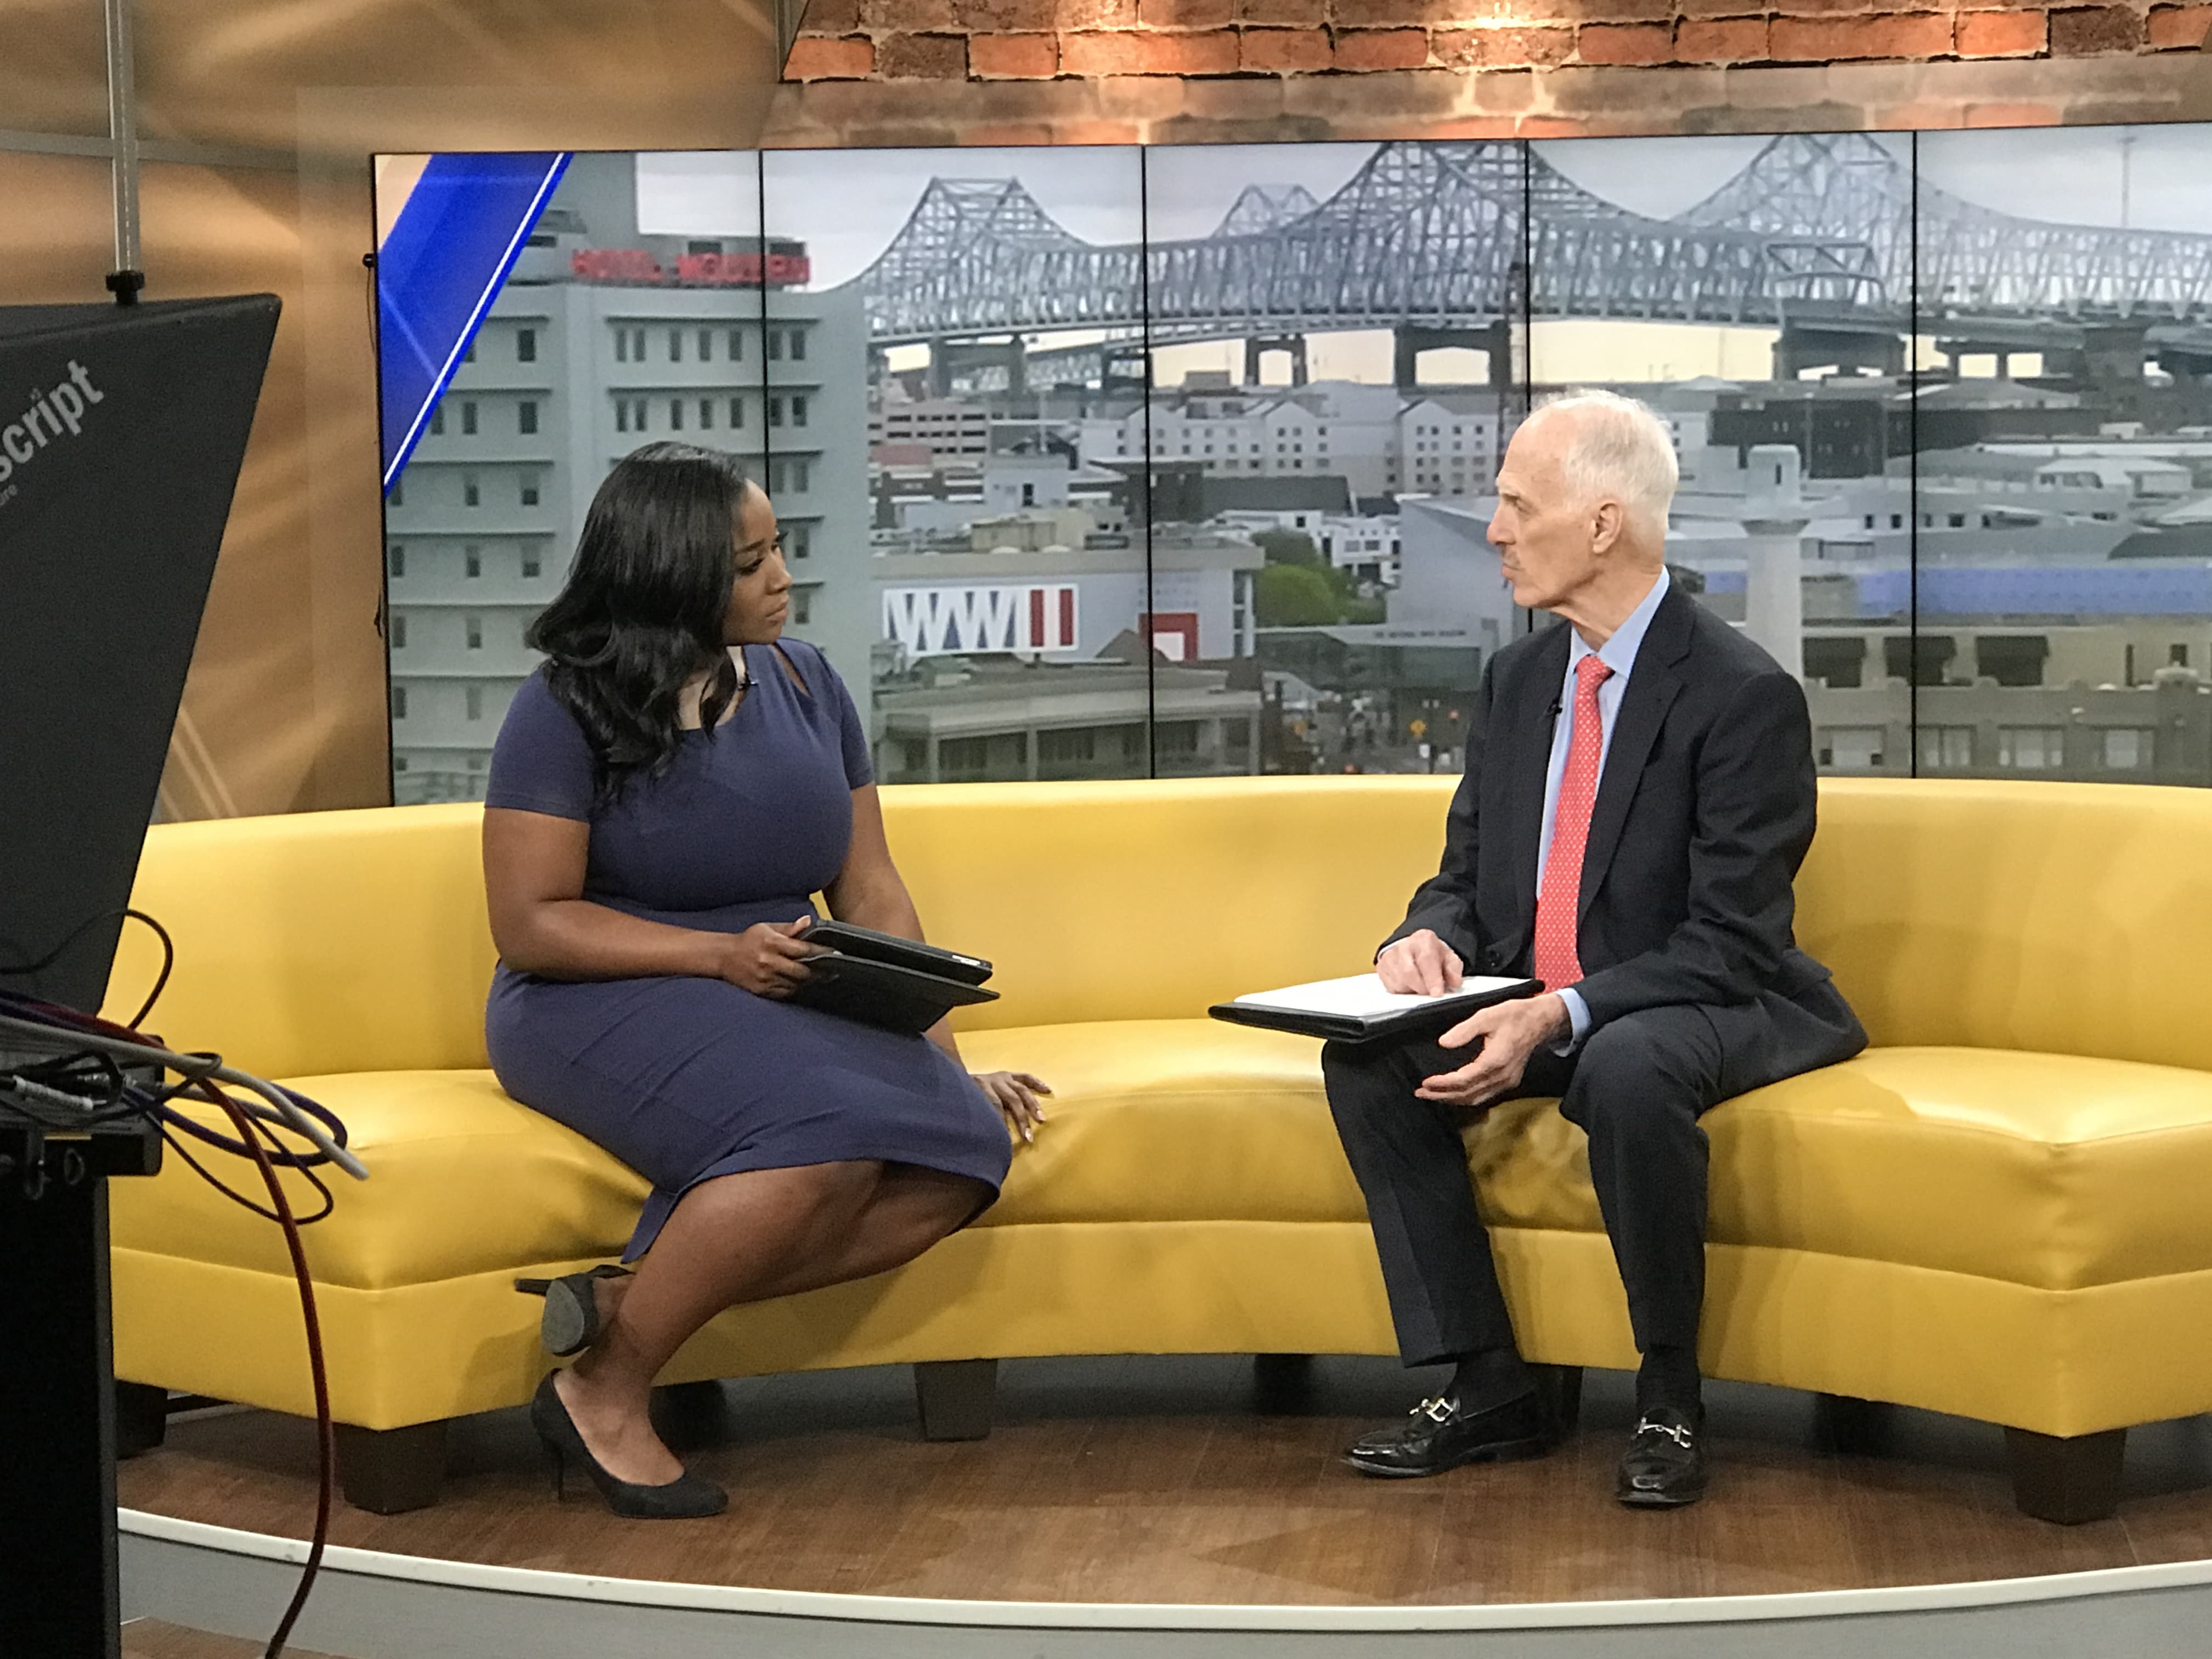 WDSU: CCANO’s Dr. Elmore Rigamer discusses how to talk to your children about violence